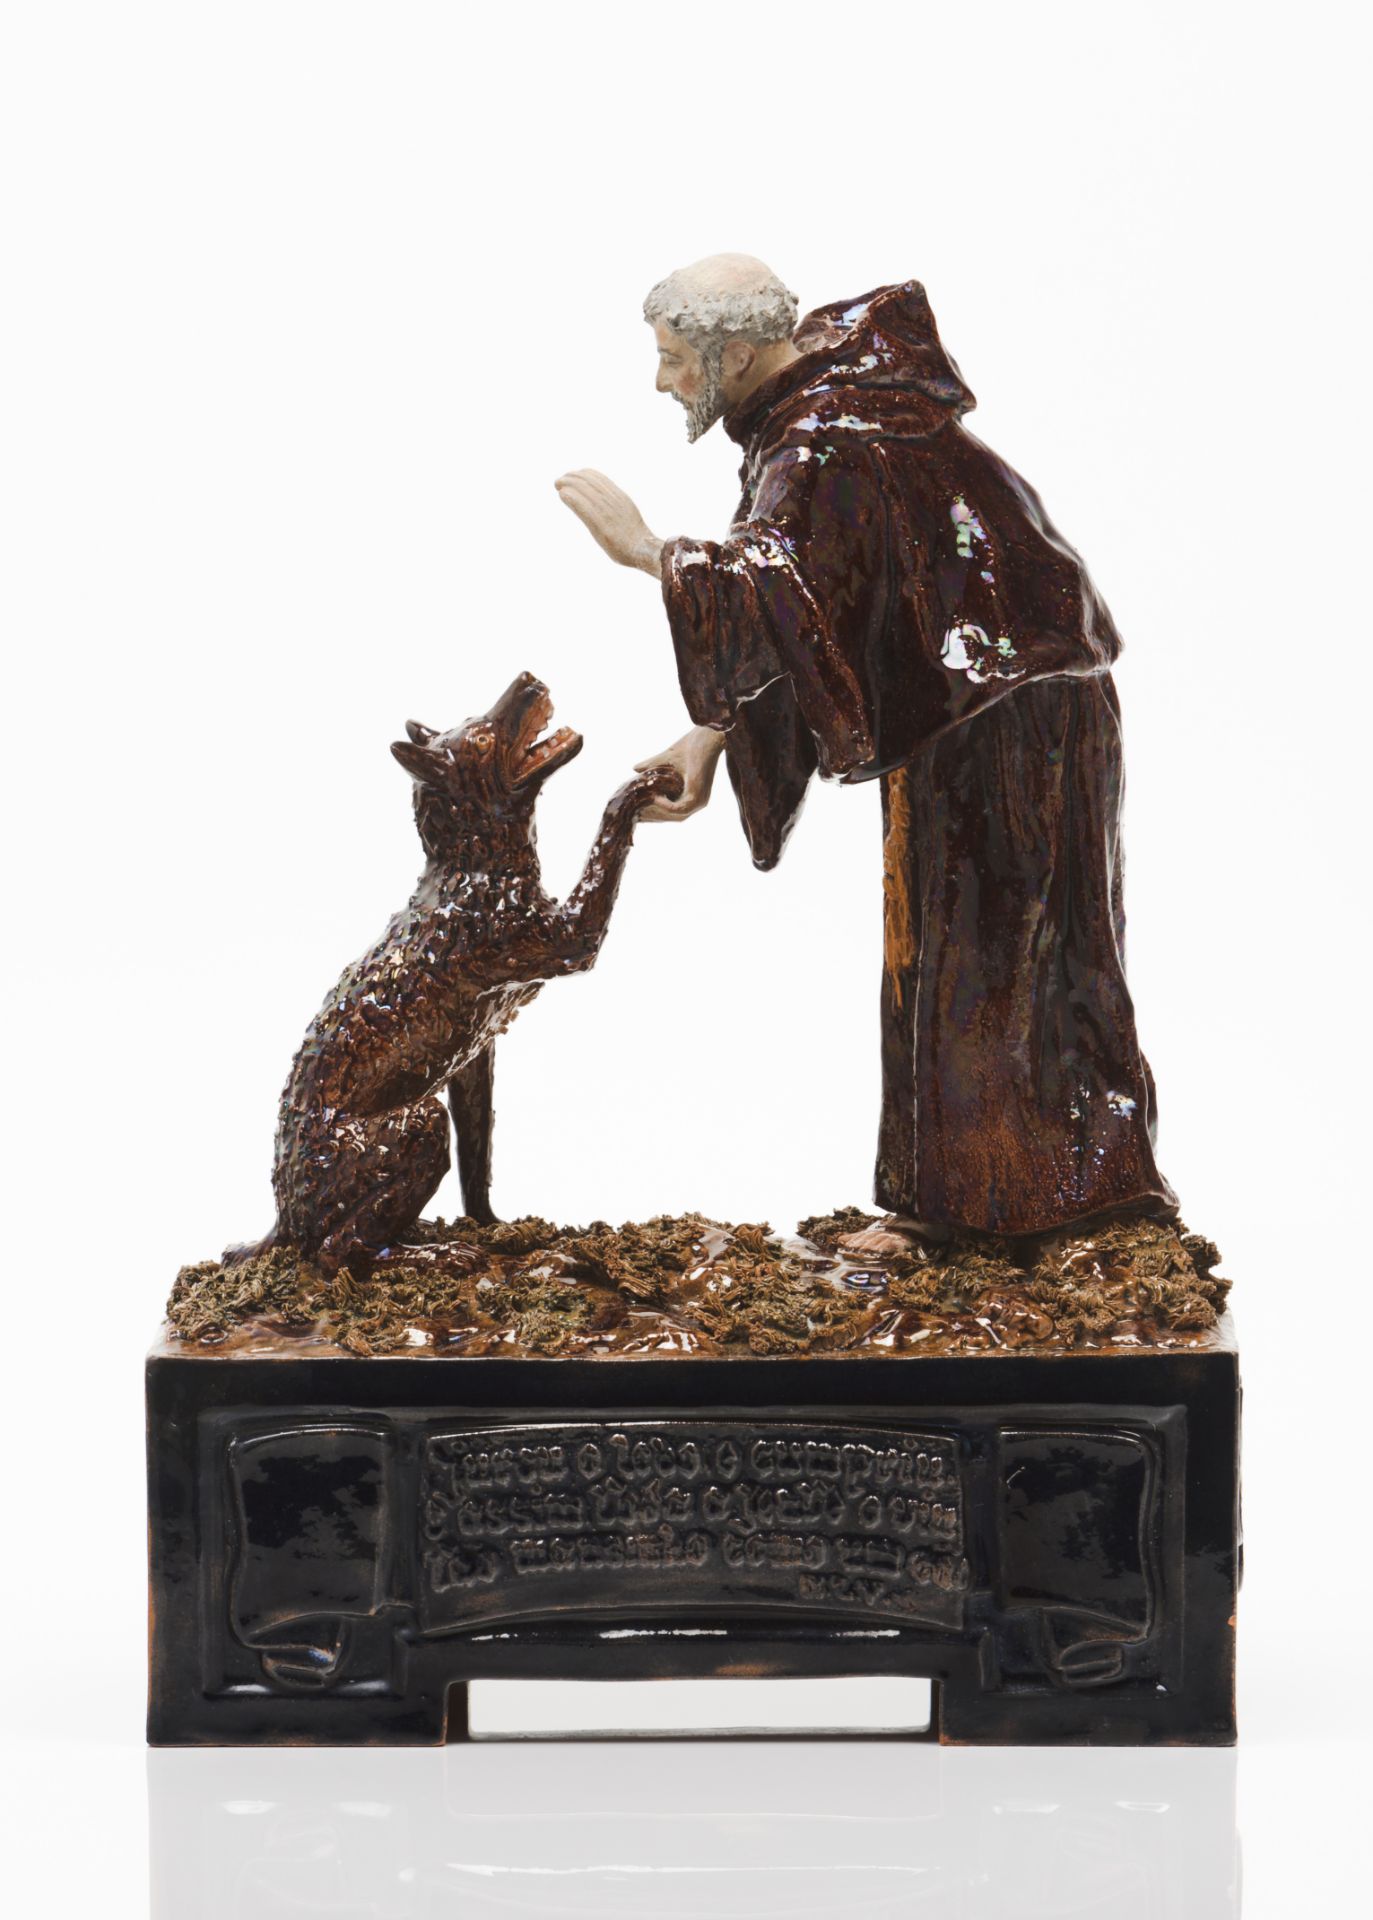 "Saint Francis of Assisi miracle of domesticating the wolf of Gubbio"